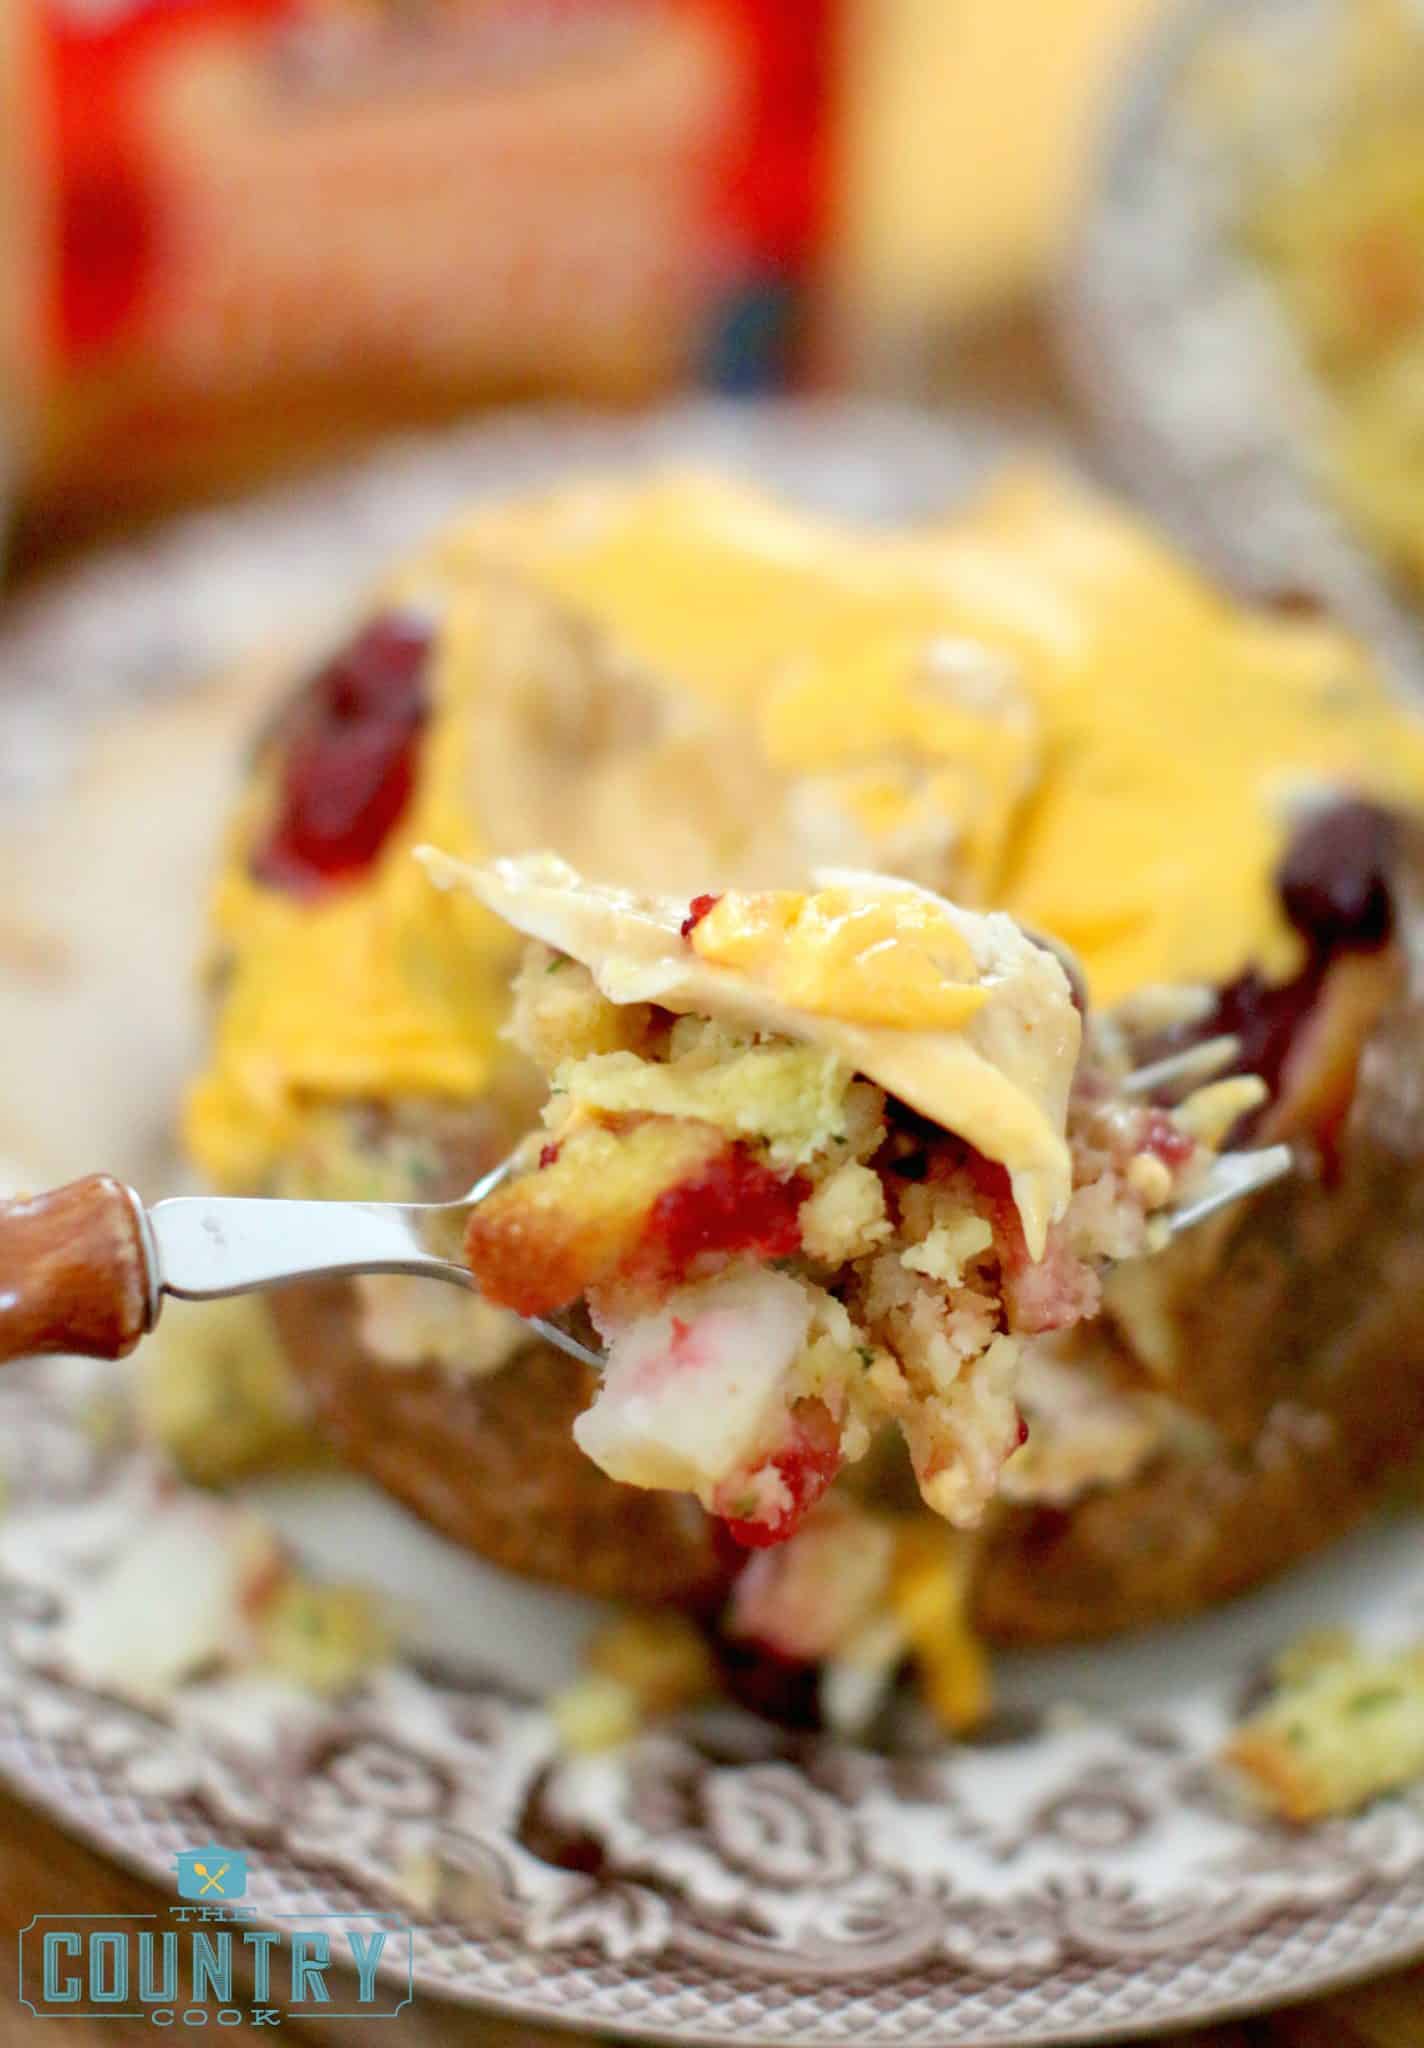 A fork holding a serving of baked potato with turkey and stuffing.